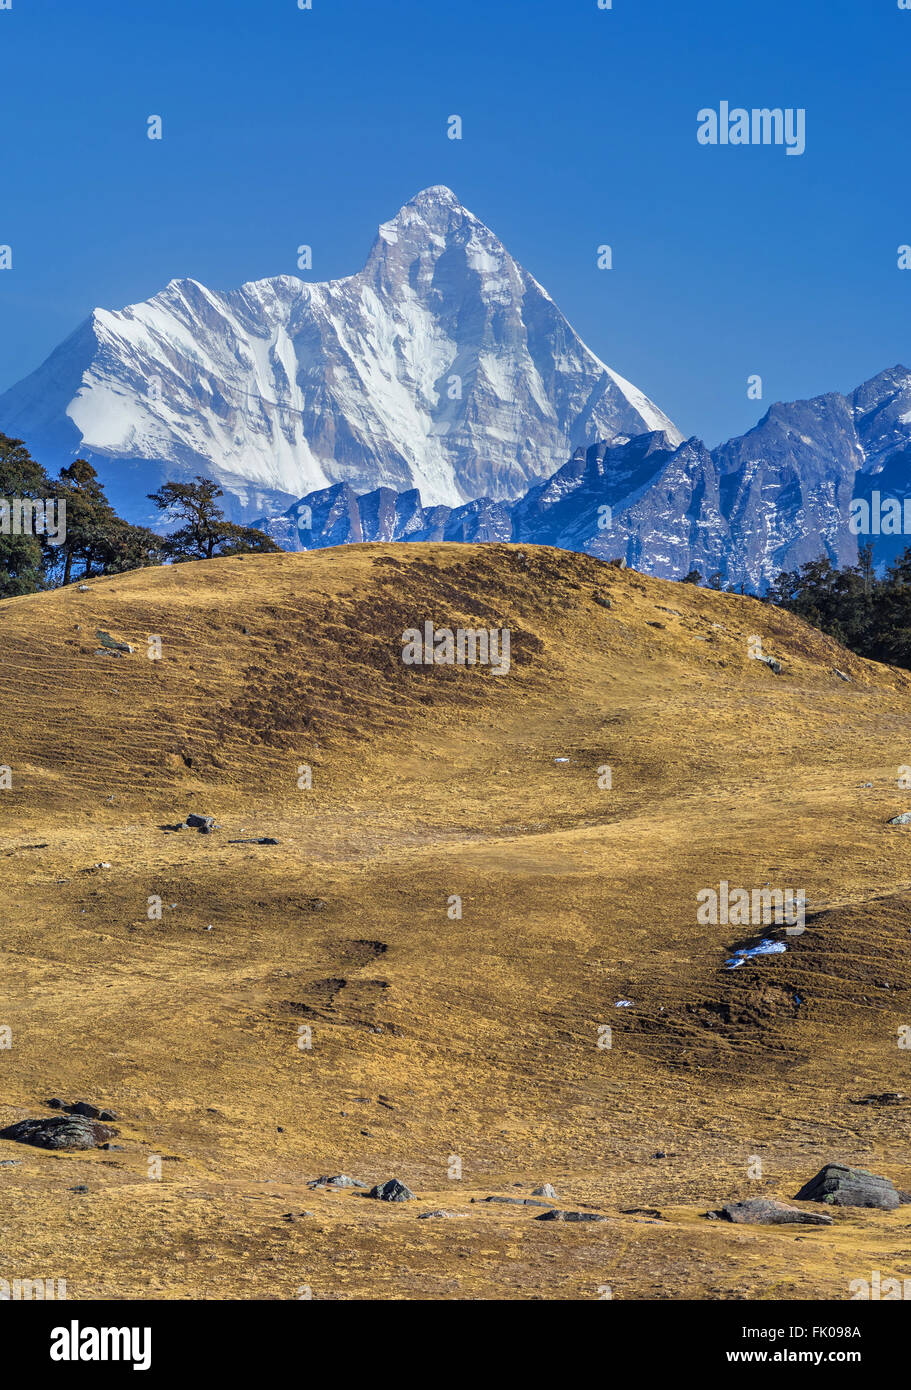 High altitude meadow  ' Gorson Bughyal'  and Nanda Devi Peak  at Auli, Uttrakhnad, India Stock Photo